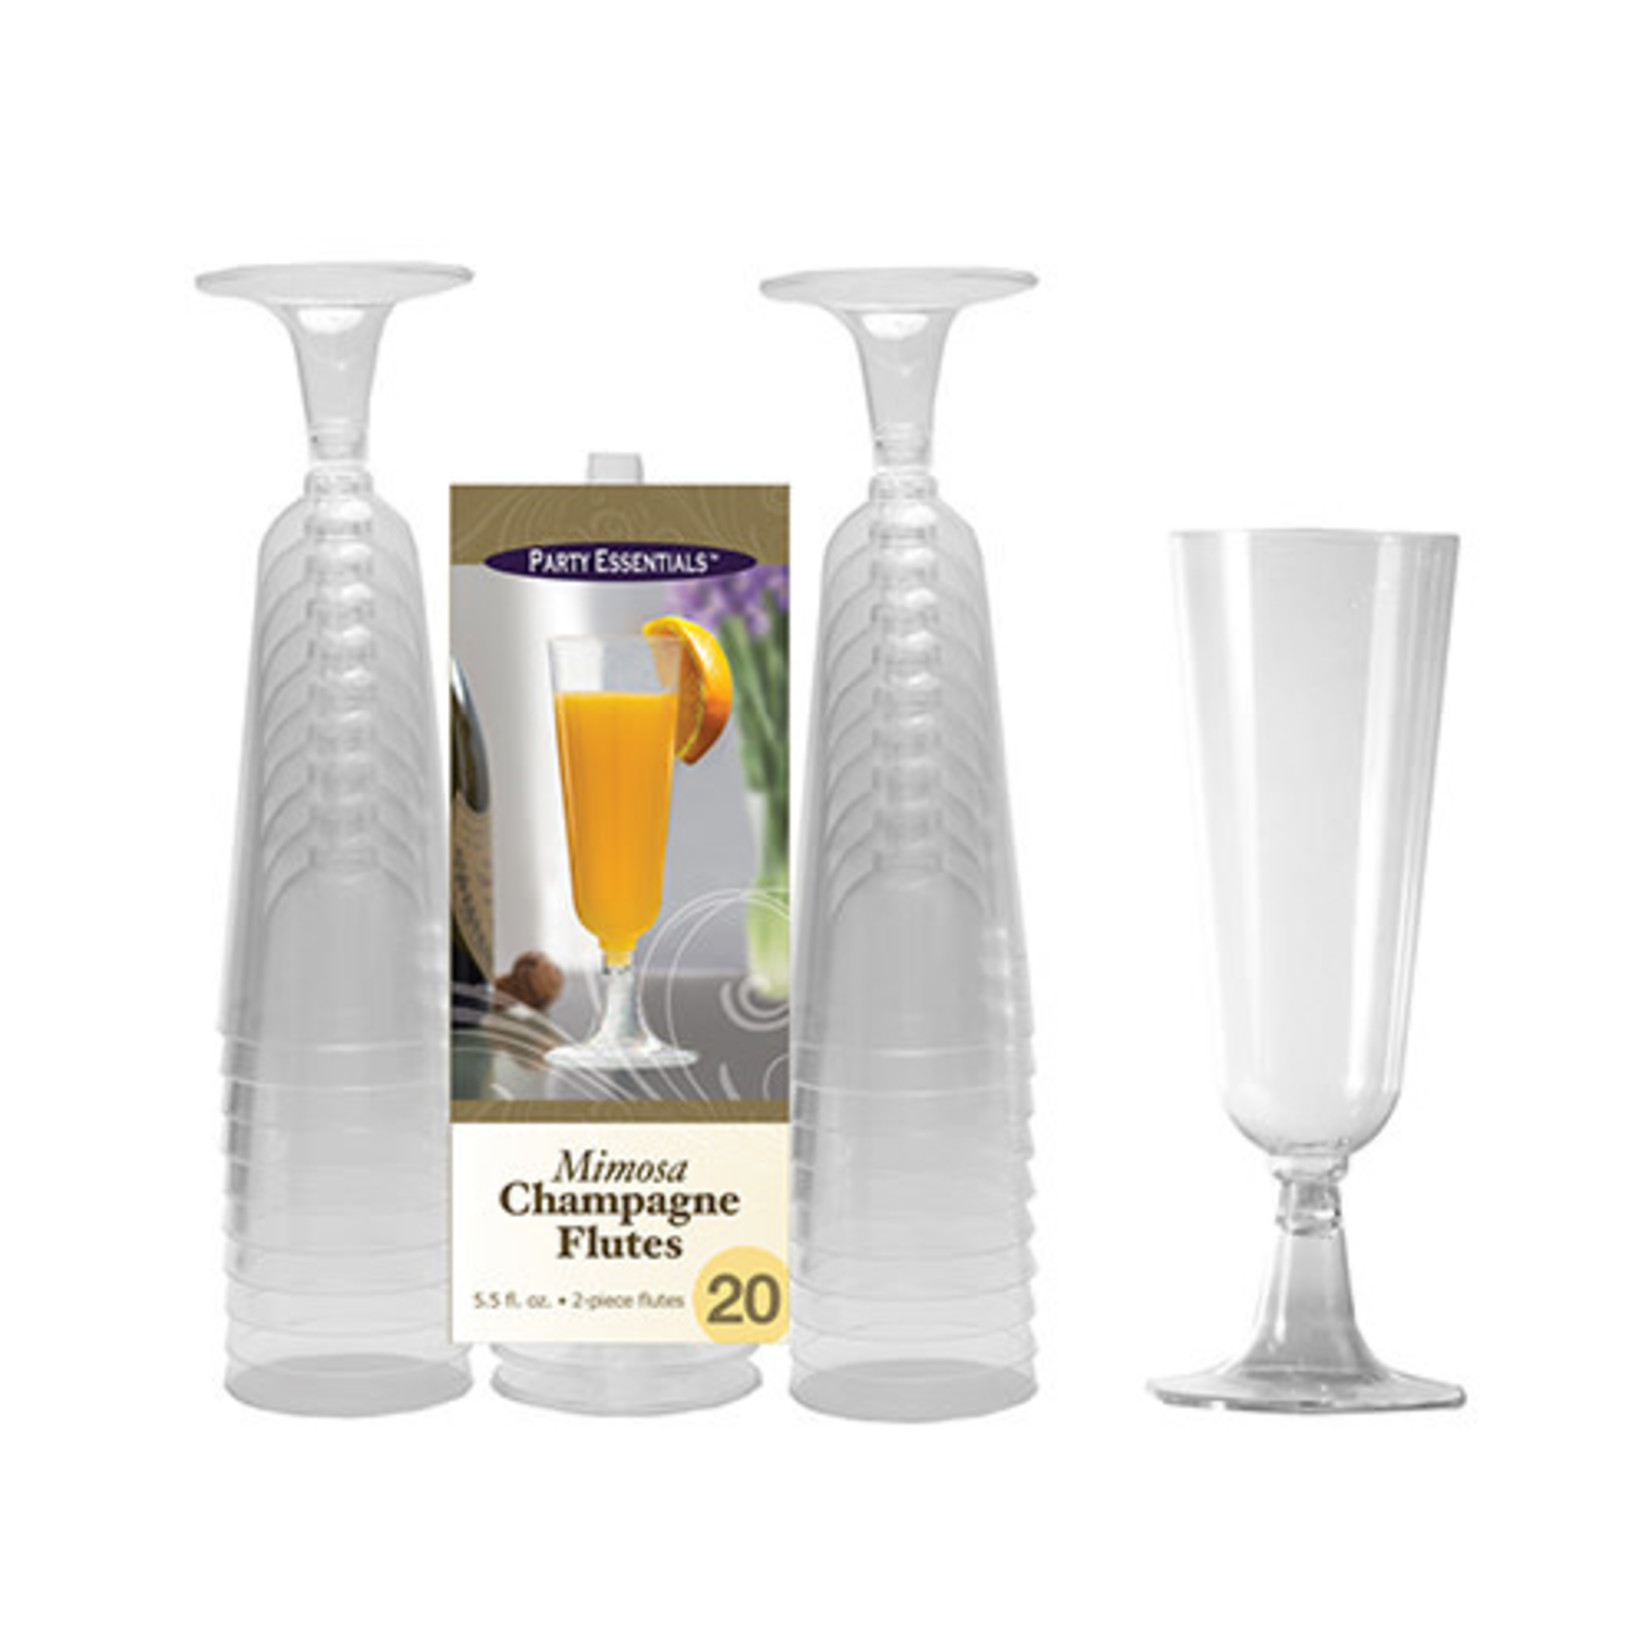 Party Essentials 5.5oz. Clear 2pc. Mimosa Flutes - 20 Ct.